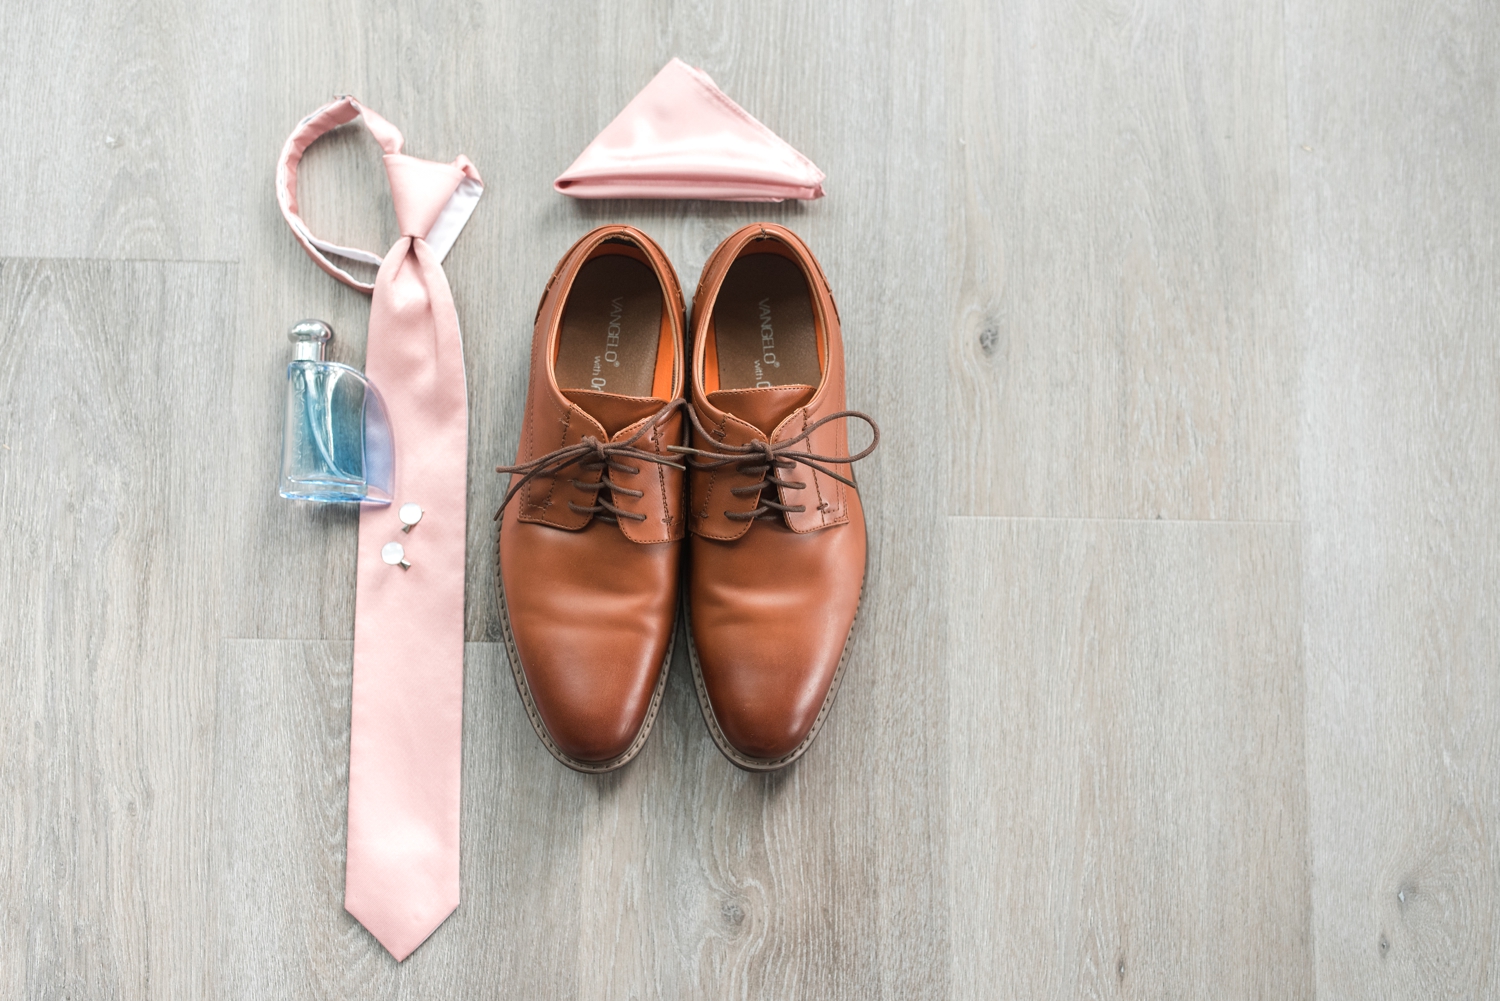 Blush & Dusty Blue Wedding at The Wooded Knot | Courtney Rudicel ...